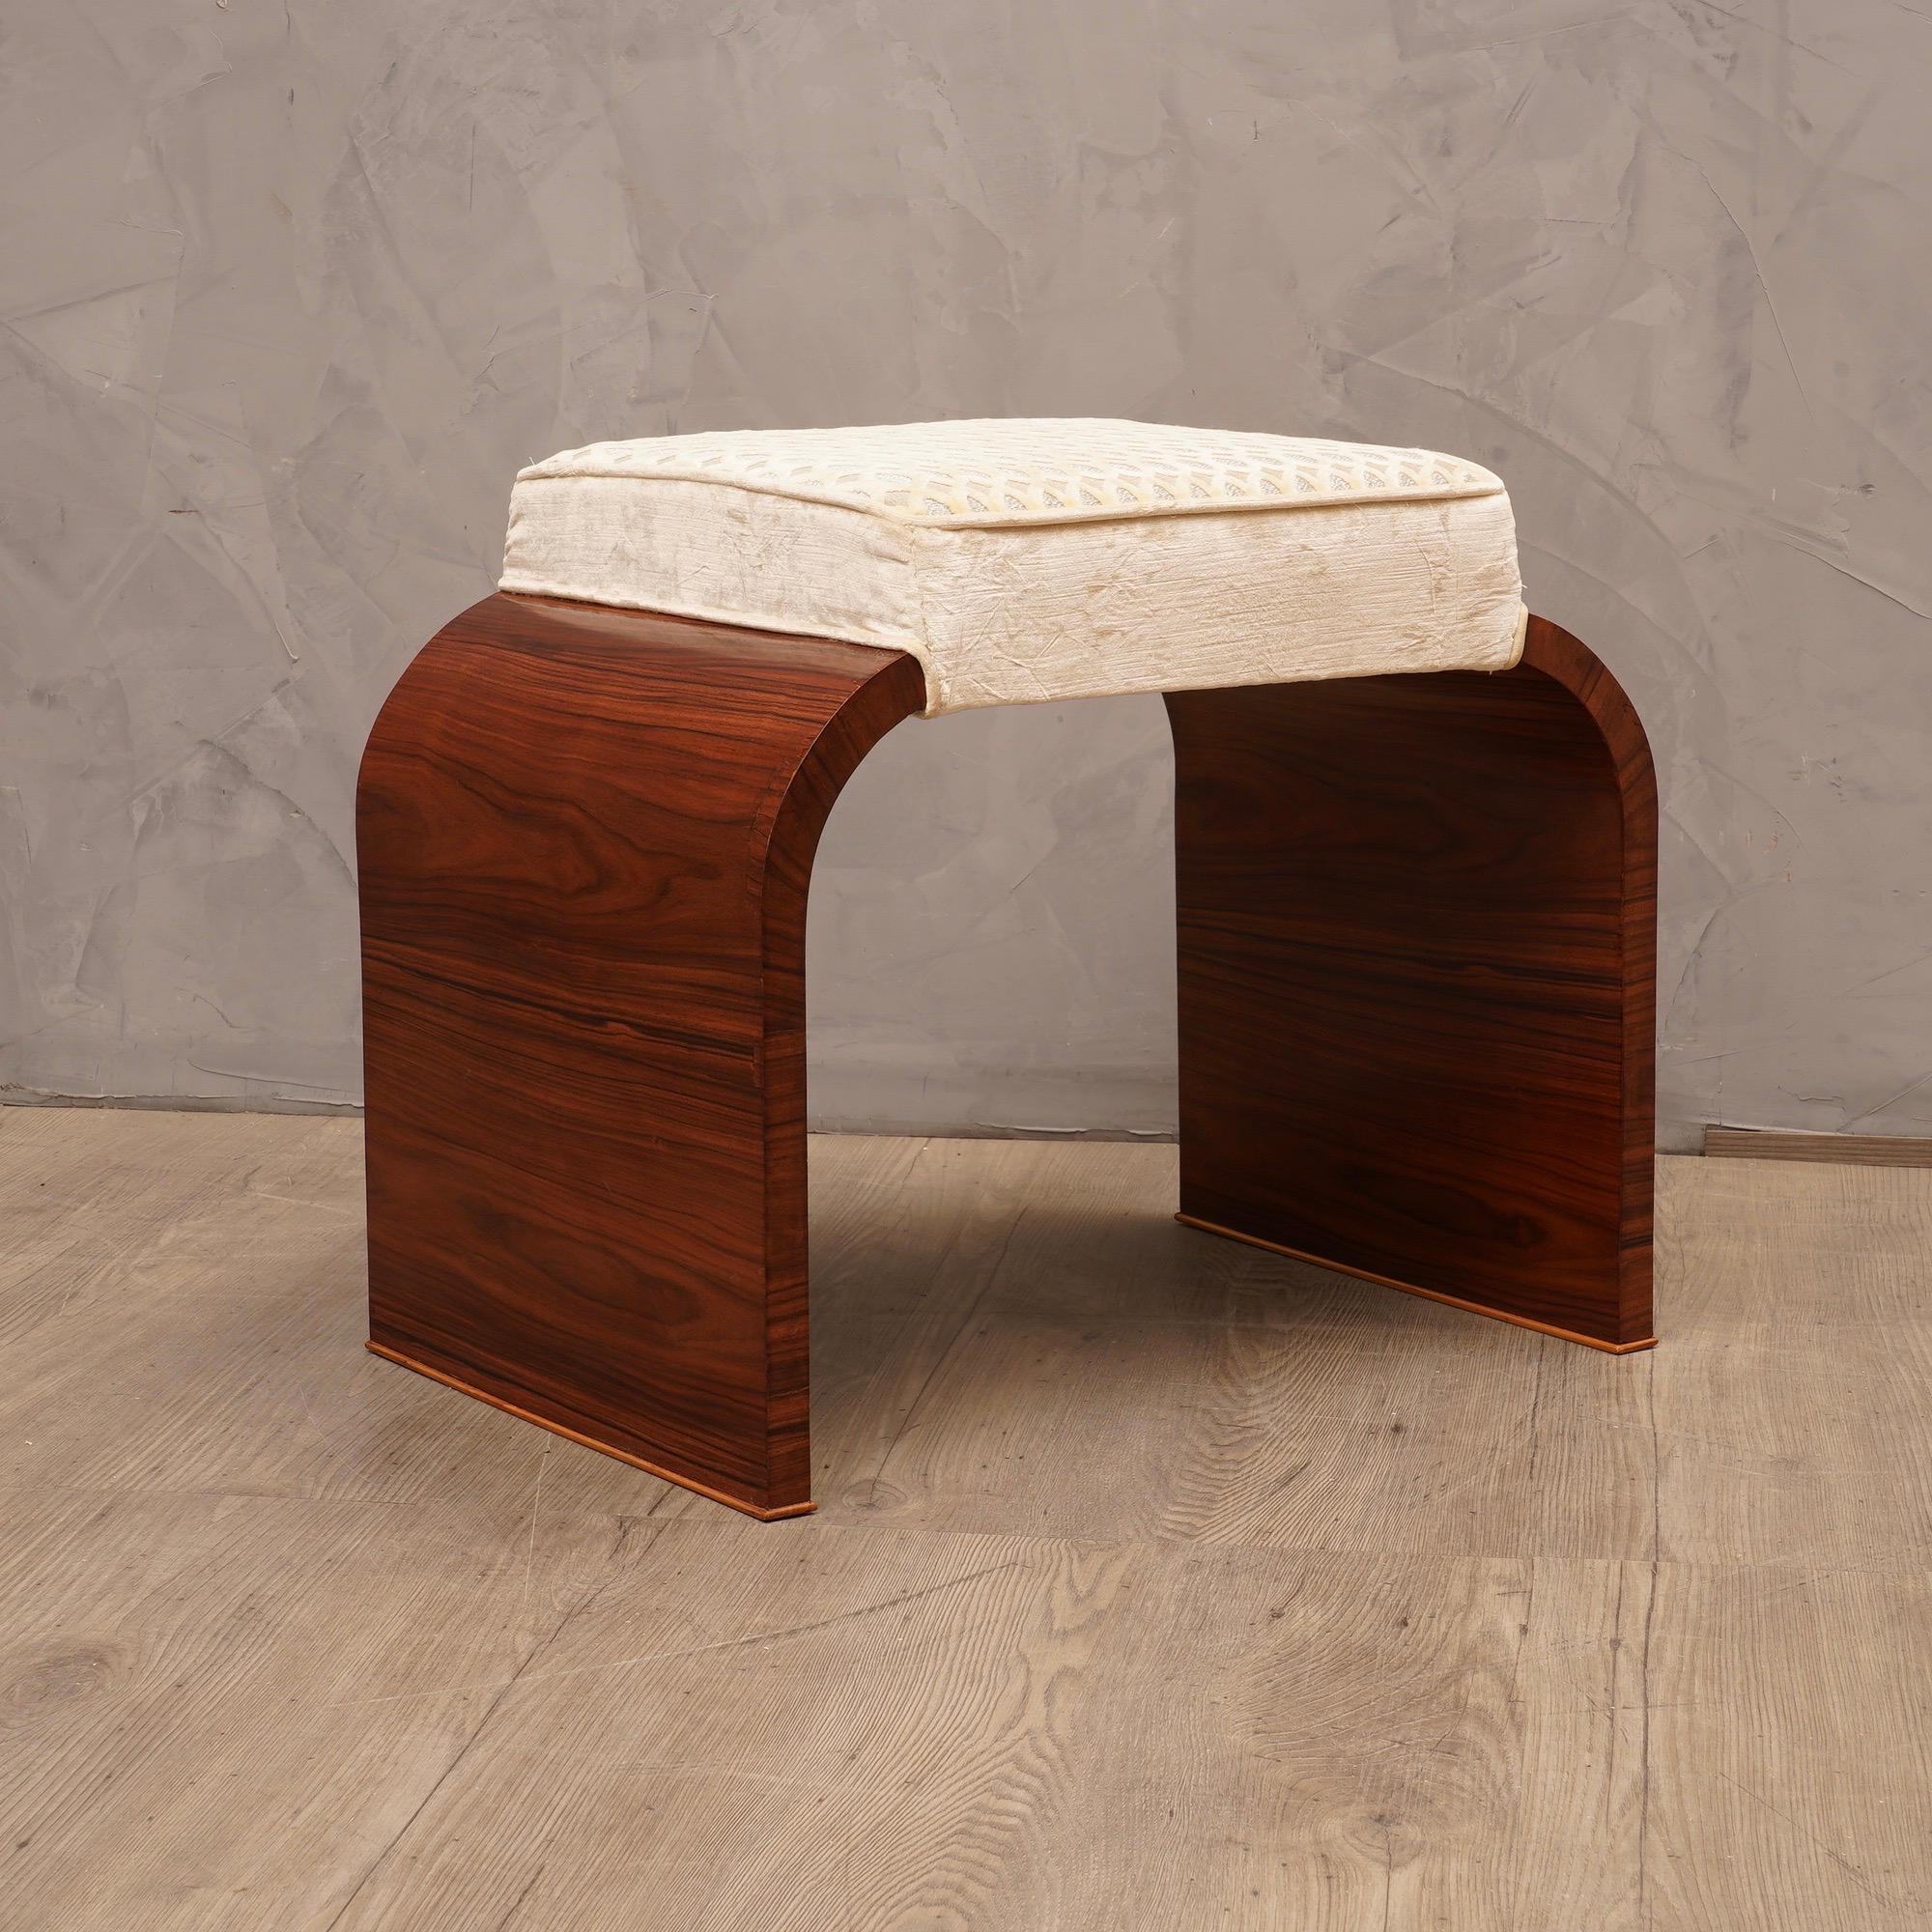 Adorable pair of benches with very elegant shape embellished with a beautiful white velvet.

The structure of the two benches is in polished walnut wood with shellac, very beautiful its design. Above the structure rests a square cushion with an